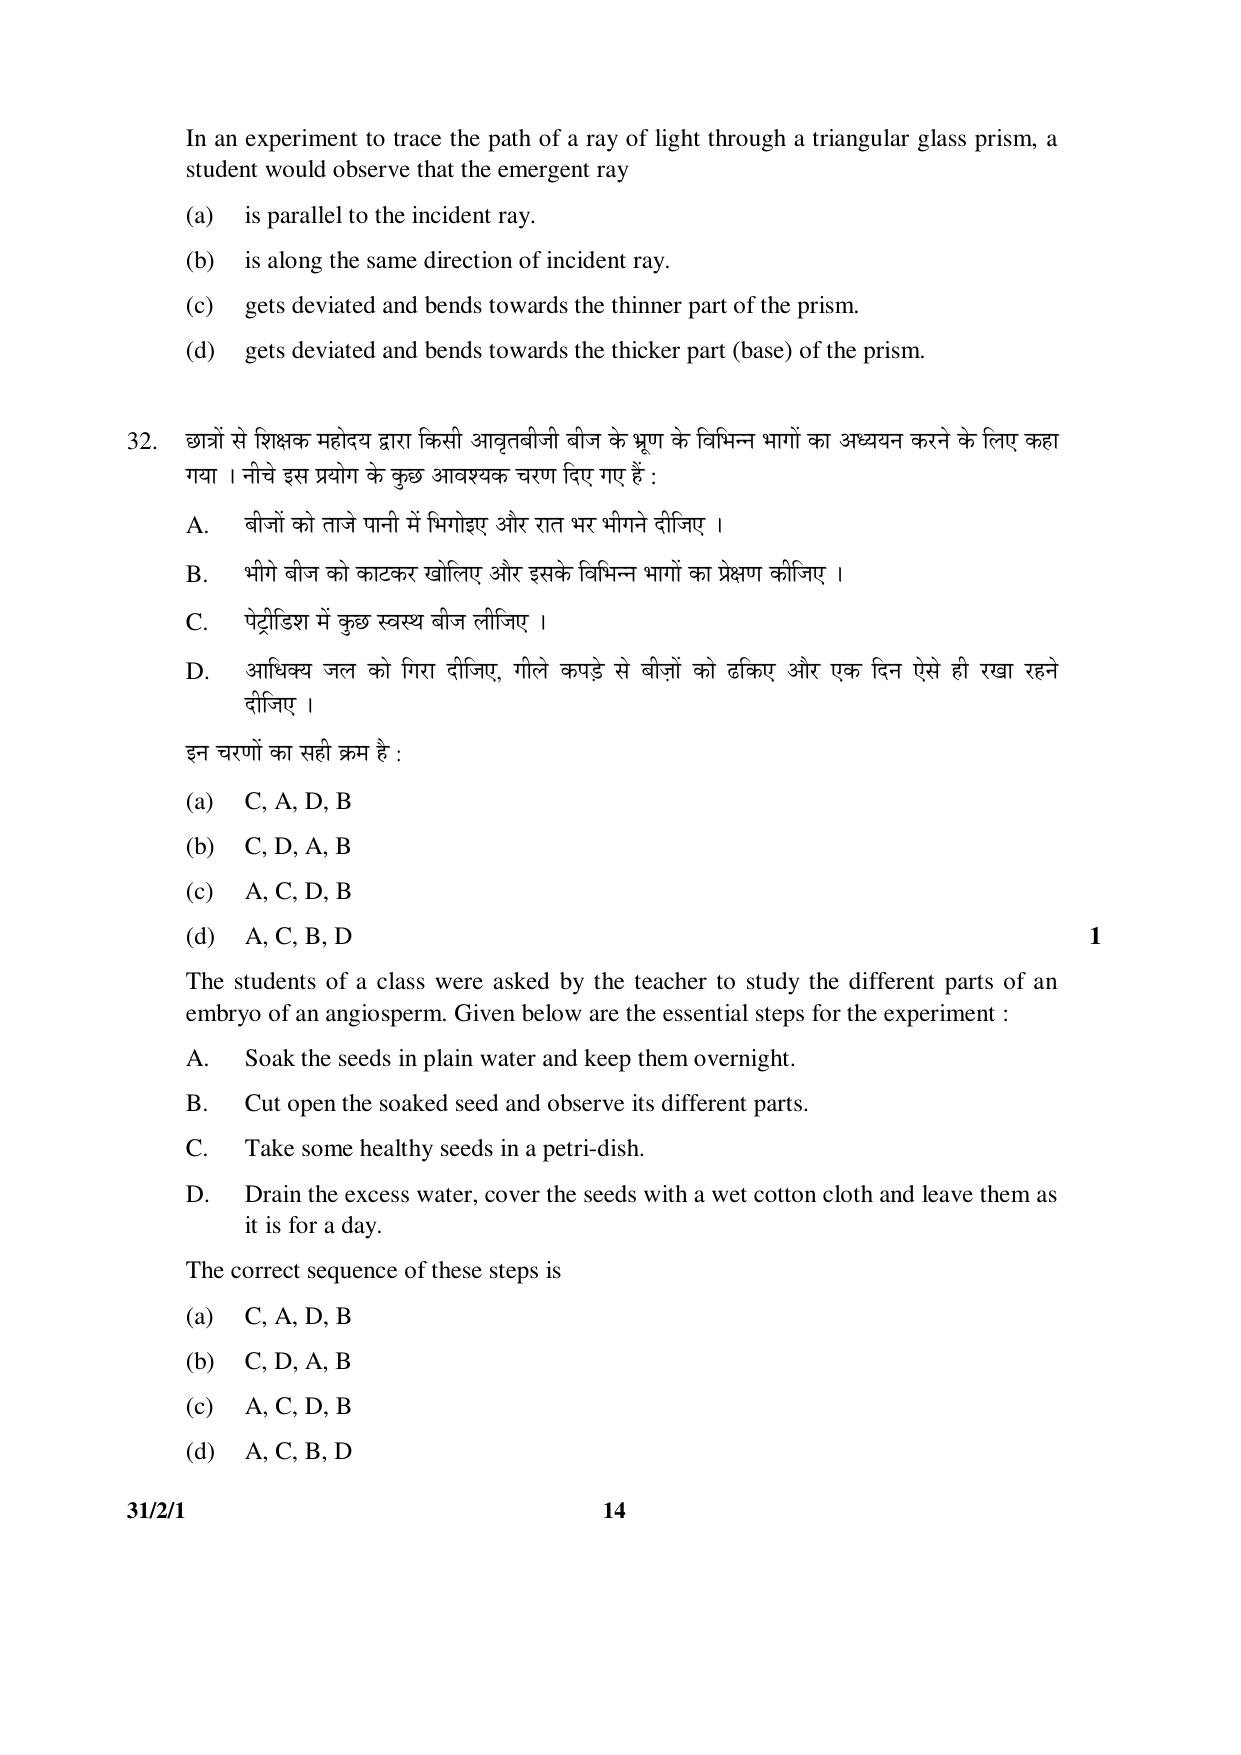 CBSE Class 10 31-2-1 _Science 2016 Question Paper - Page 14